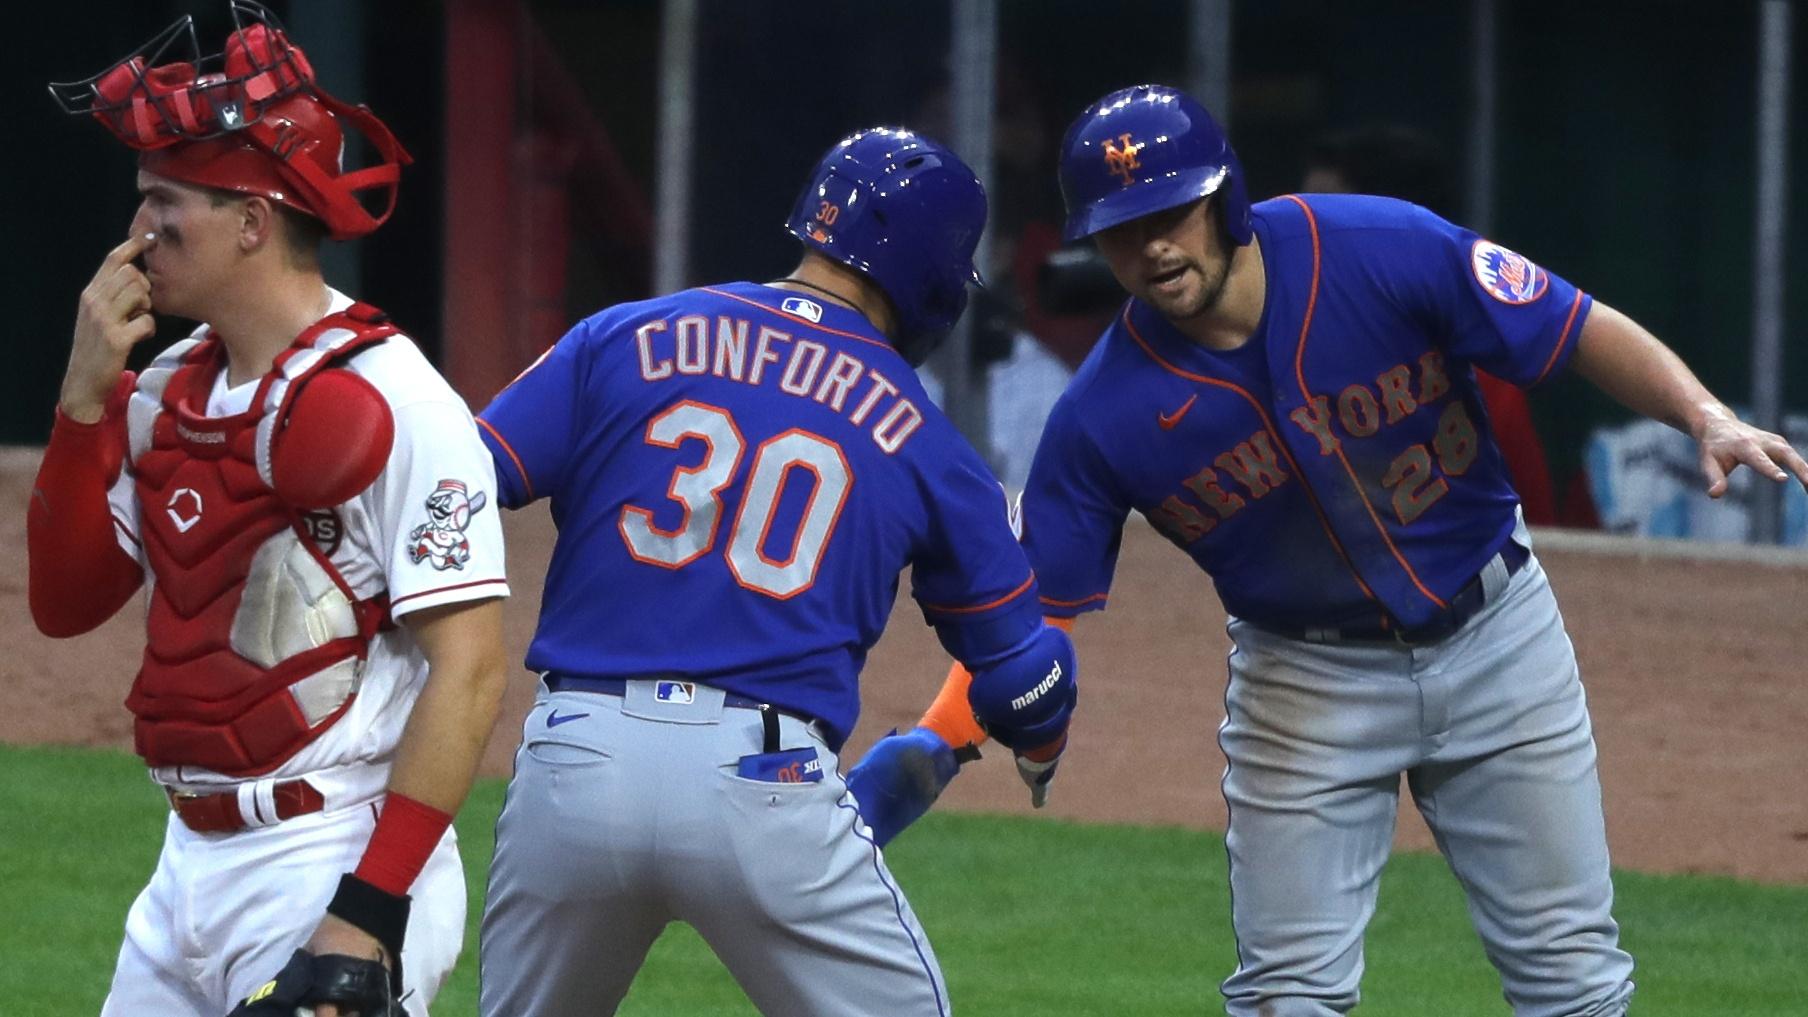 Jul 19, 2021; Cincinnati, Ohio, USA; New York Mets right fielder Michael Conforto (30) reacts with third baseman J.D. Davis (28) after Conforto hit a two-run home run against the Cincinnati Reds during the fourth inning at Great American Ball Park. / © David Kohl-USA TODAY Sports